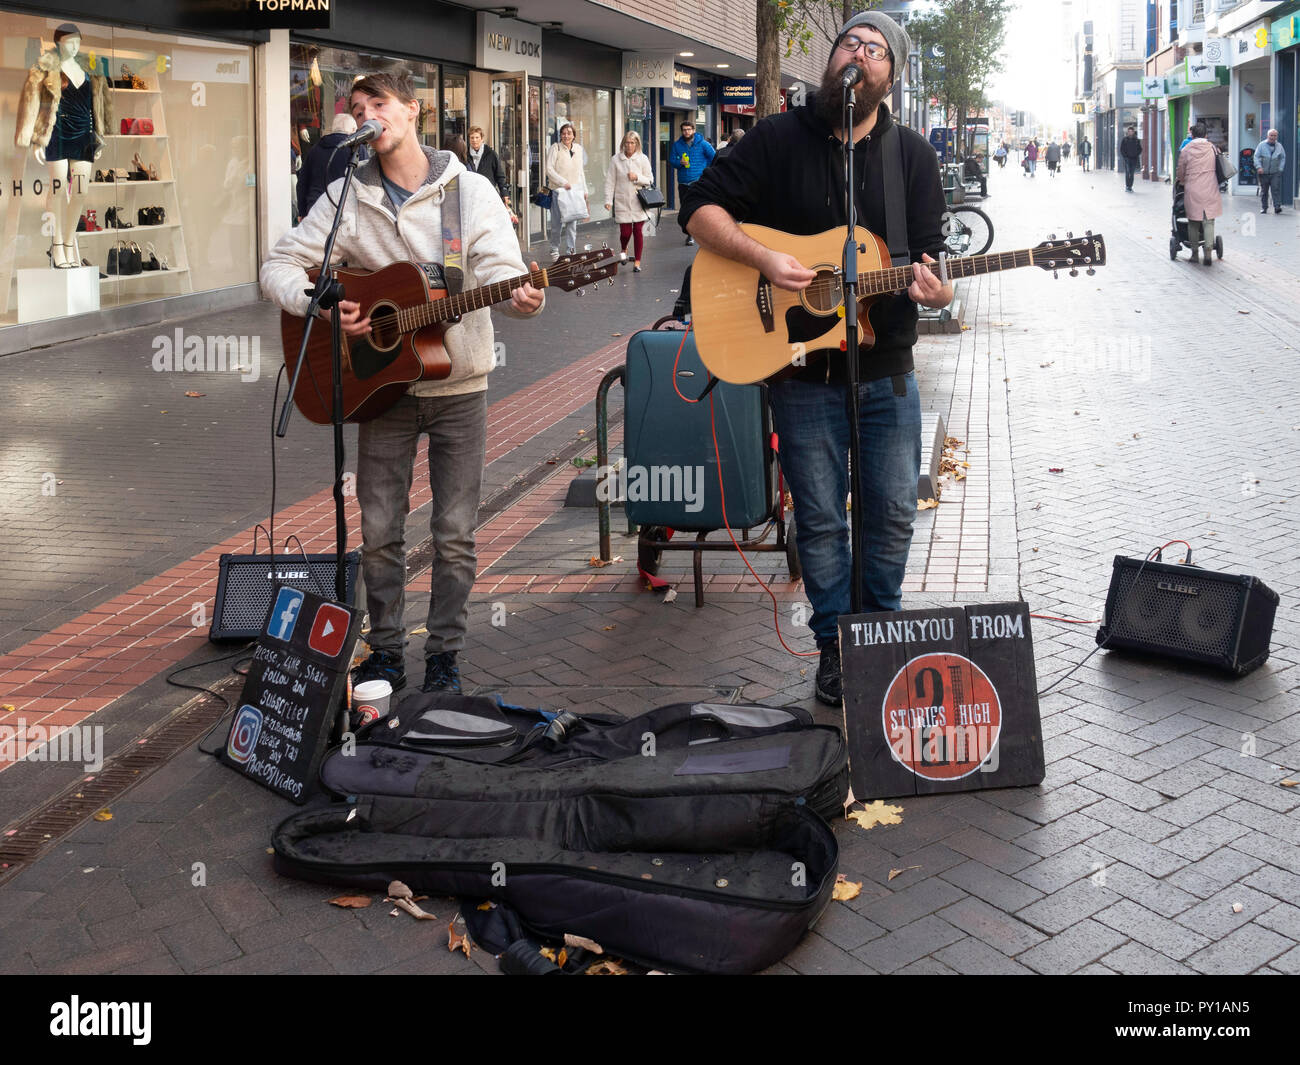 Two men street musicians called 21 Stories High singing and playing guitar  in Middlesbrough town centre Stock Photo